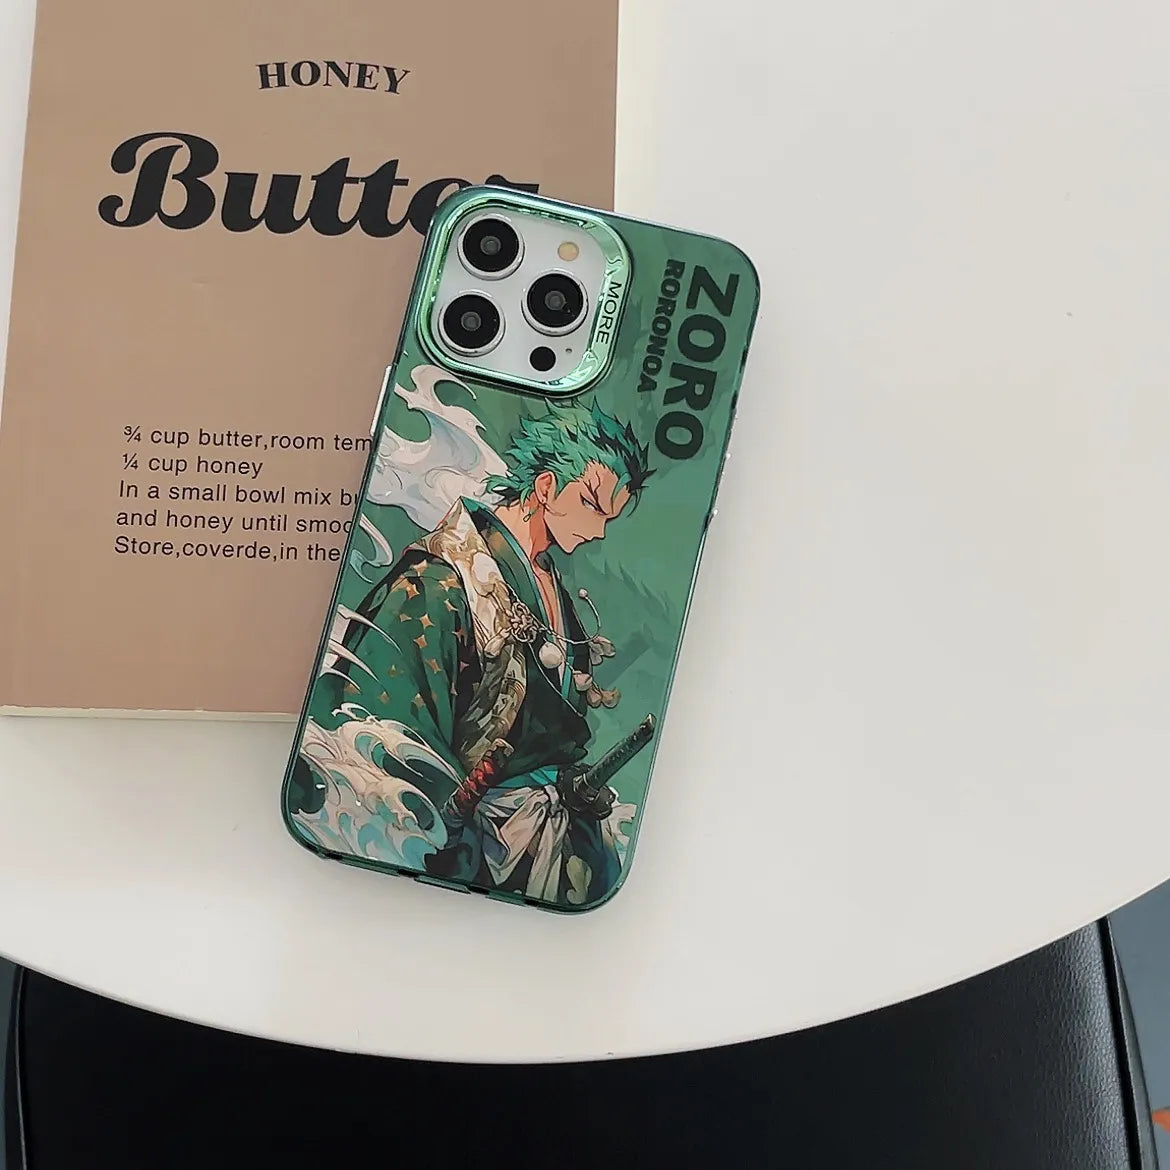 One Piece cool Iphone cases with Zoro and Luffy characters